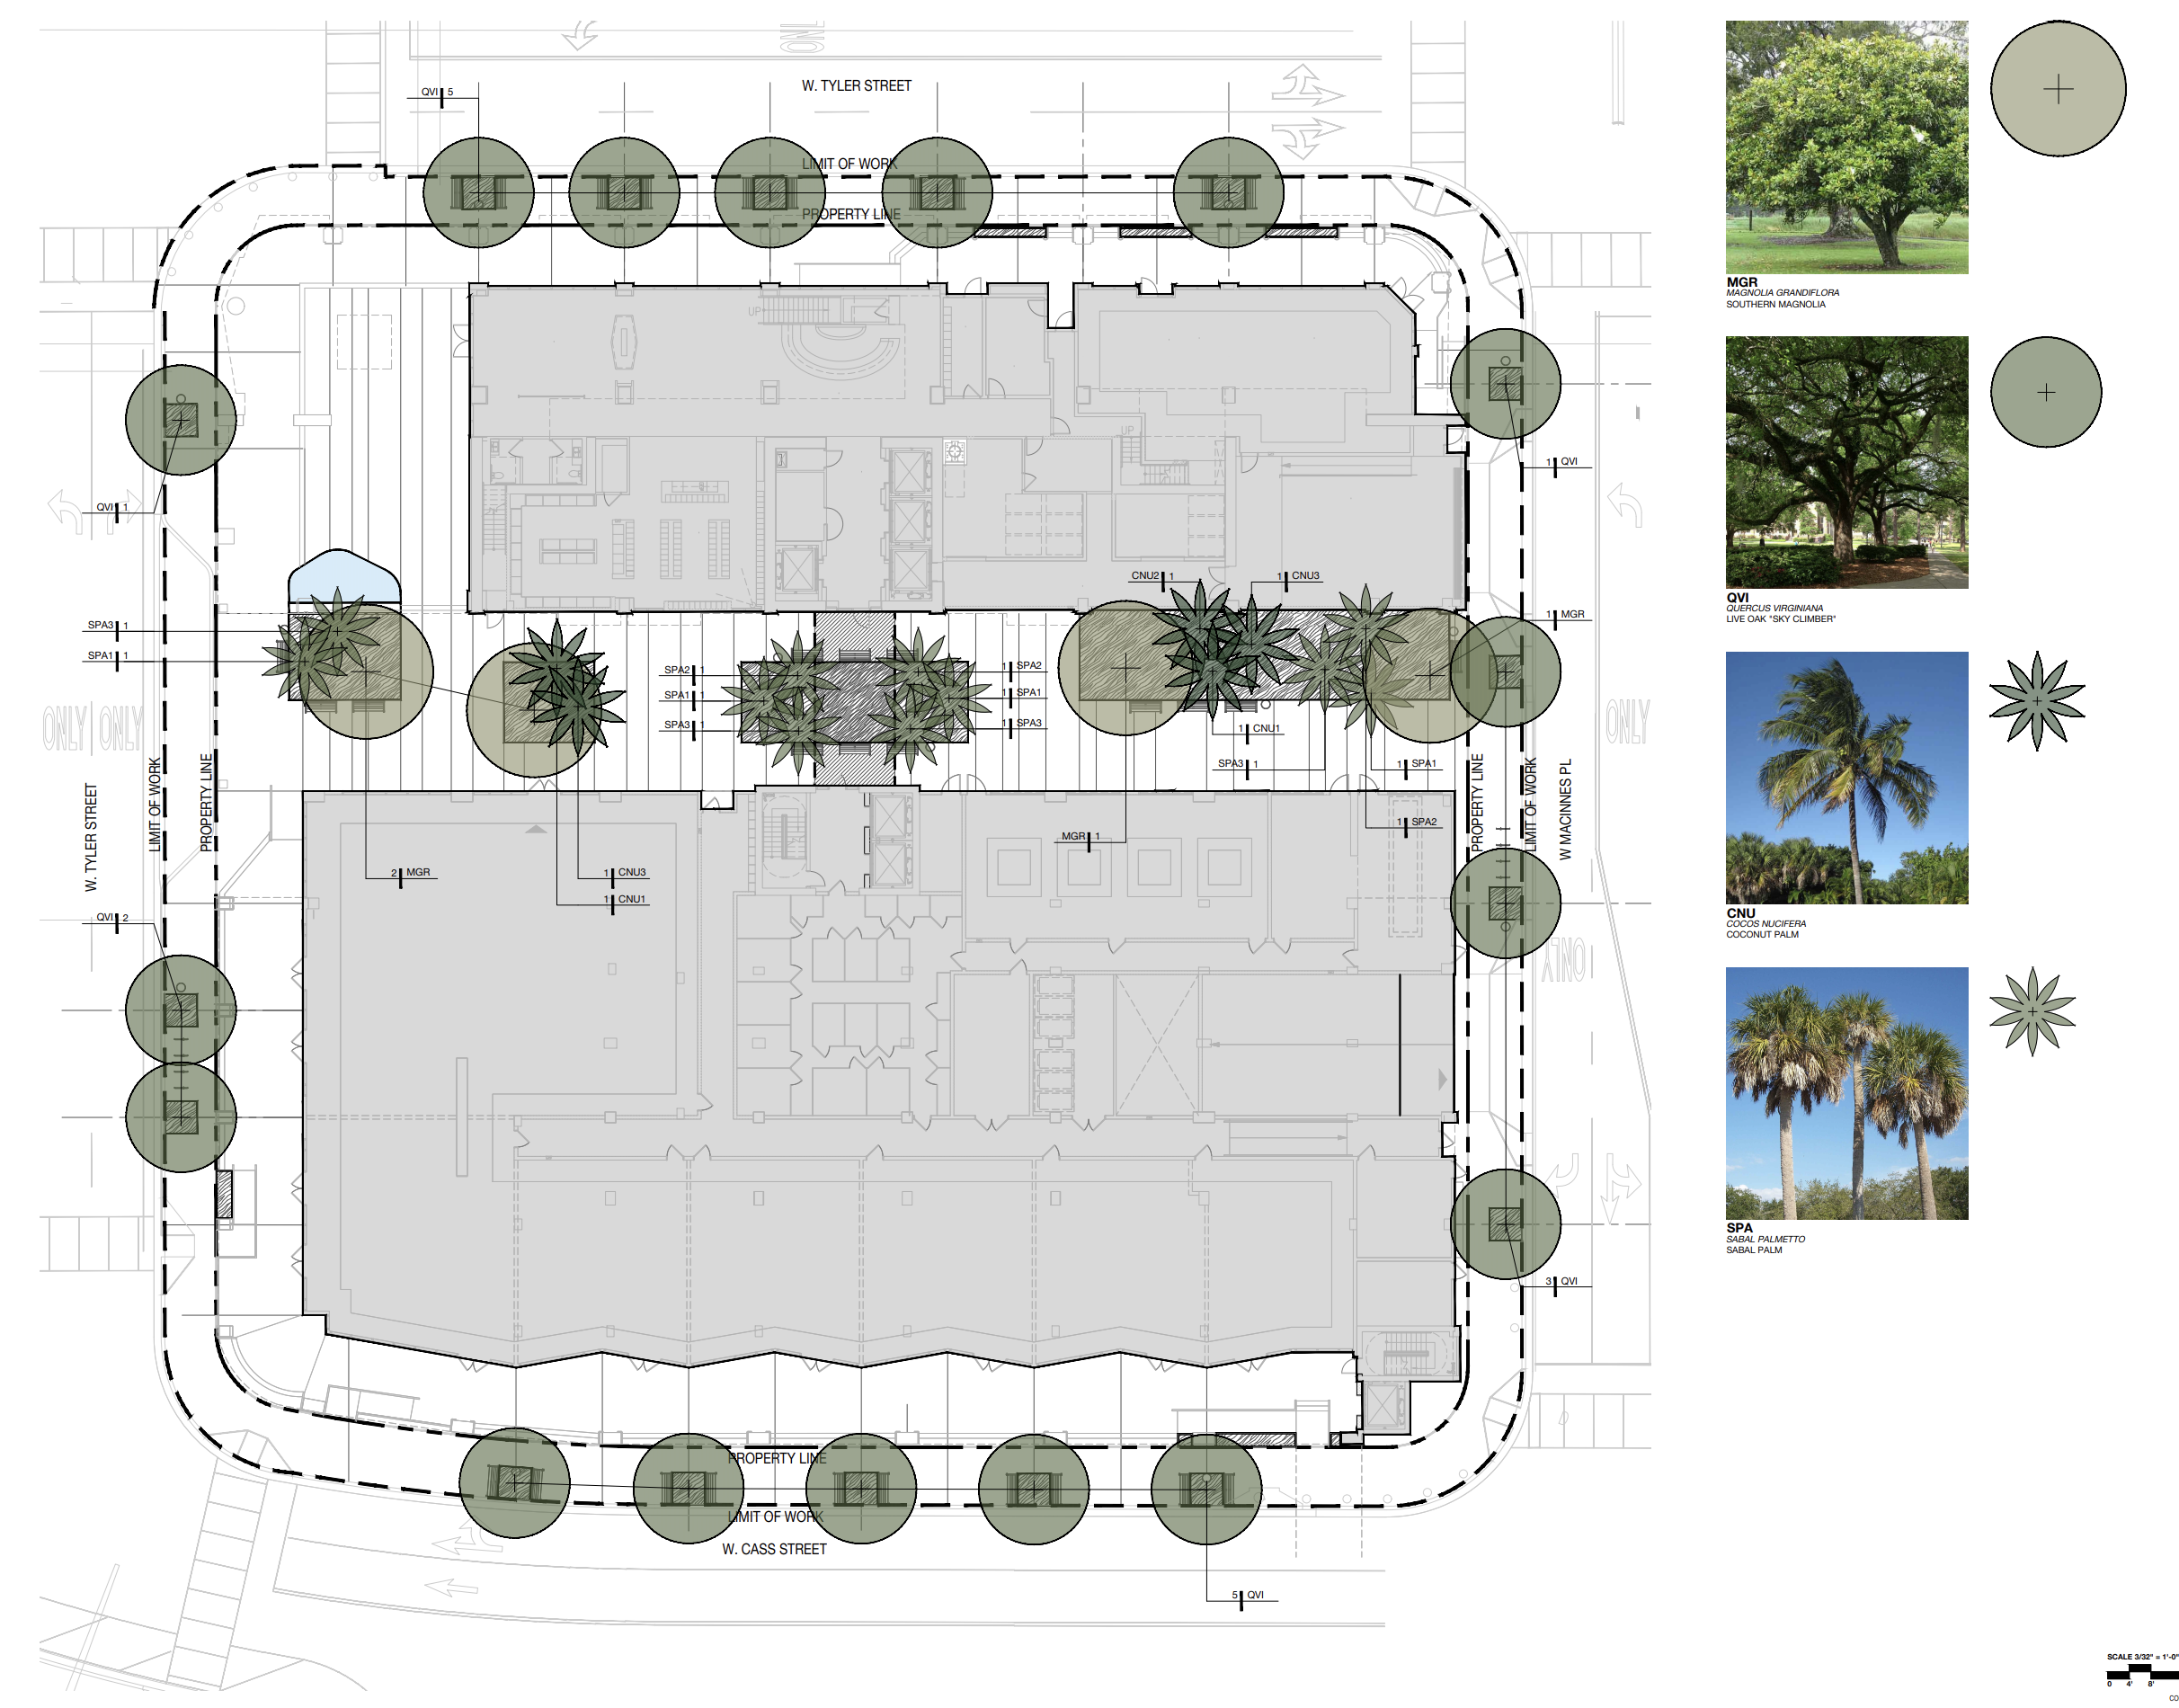 Landscaping Plans. Designed by L&ND.